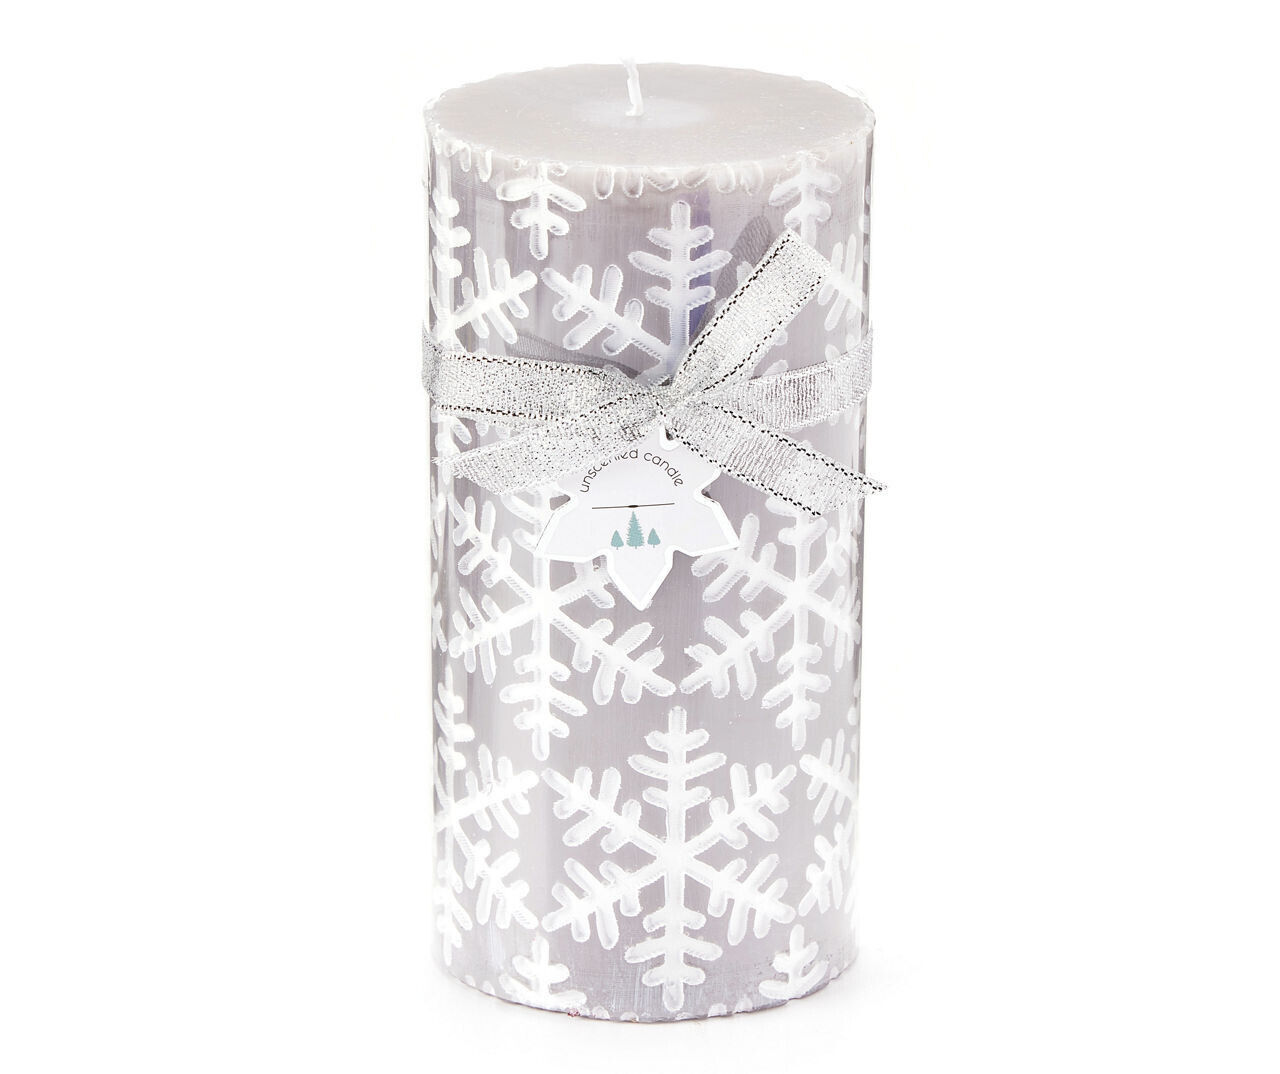 Primary image for NEW Silver & White Snowflake Pillar Candle 6 in. single wick  50 hr. burn time